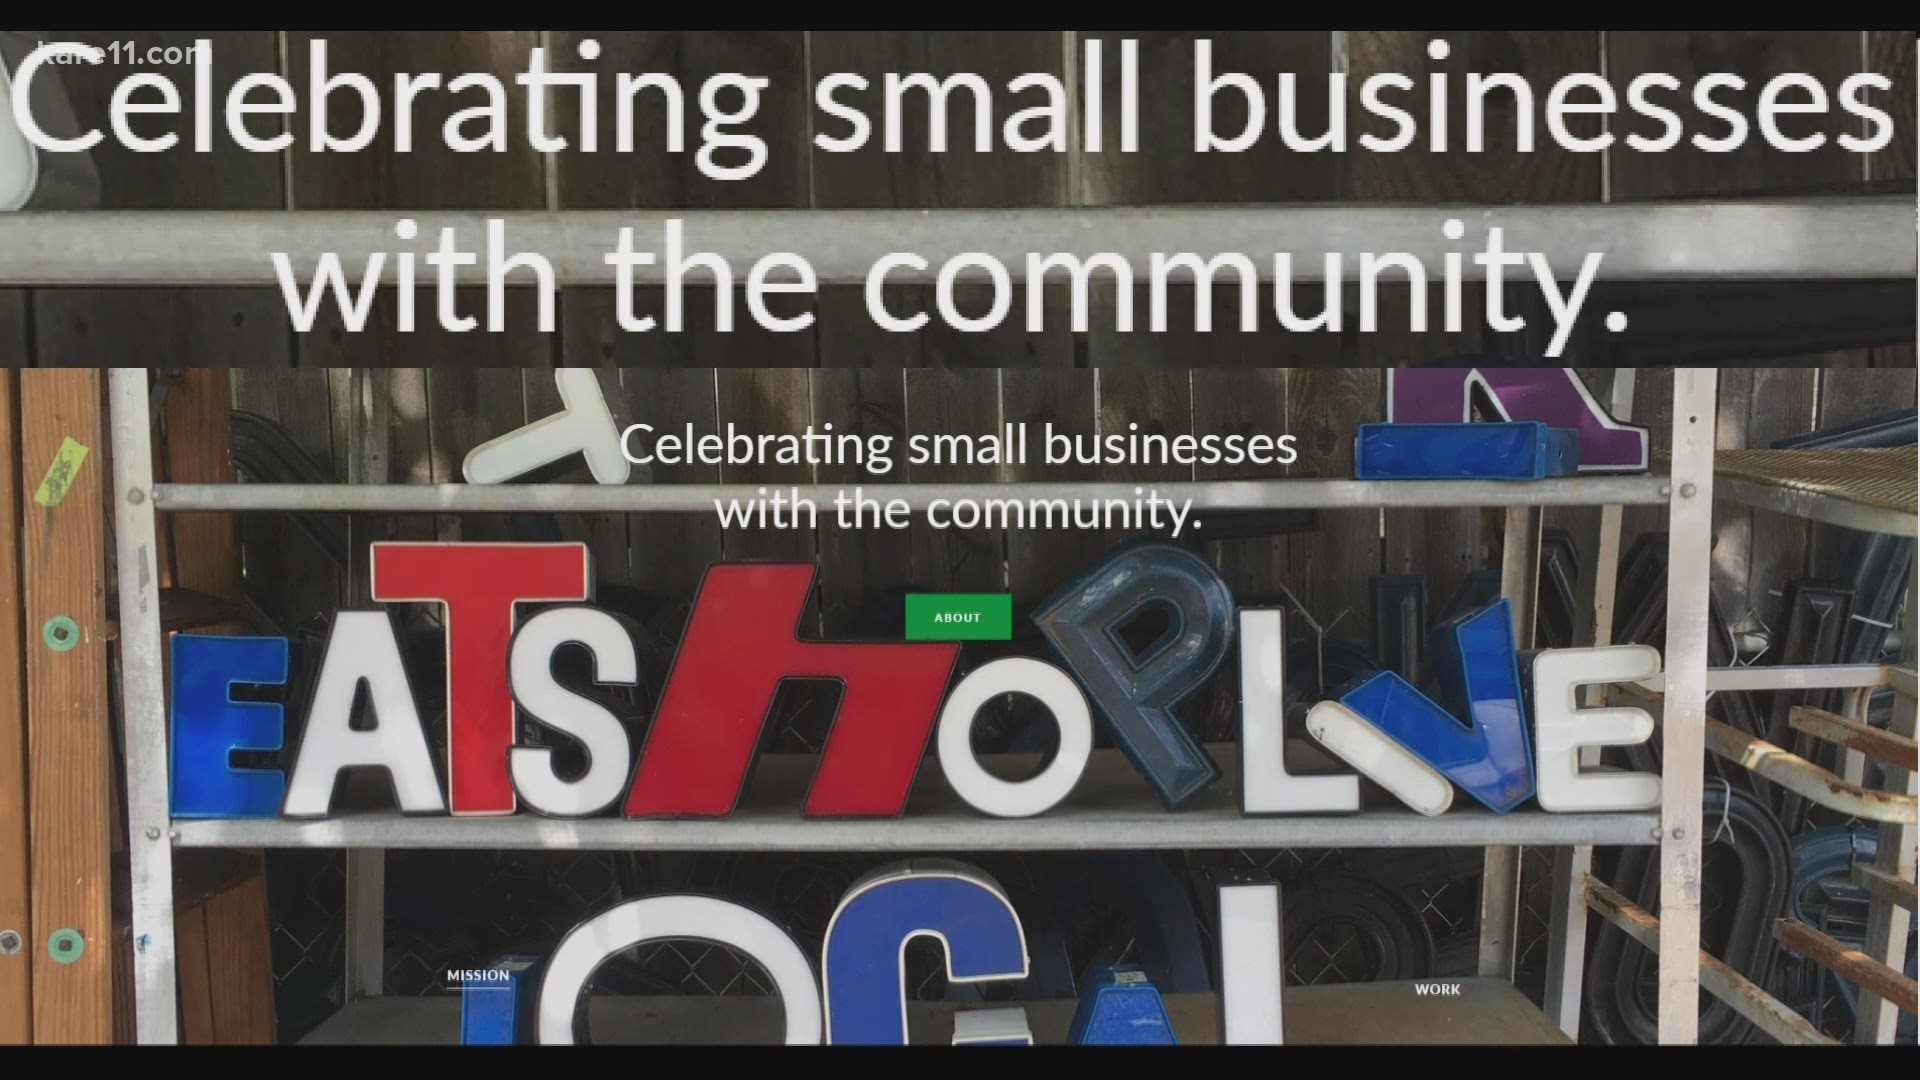 A local business owner with a passion to help small businesses has created a free online network and support system., on this week's Communities that KARE